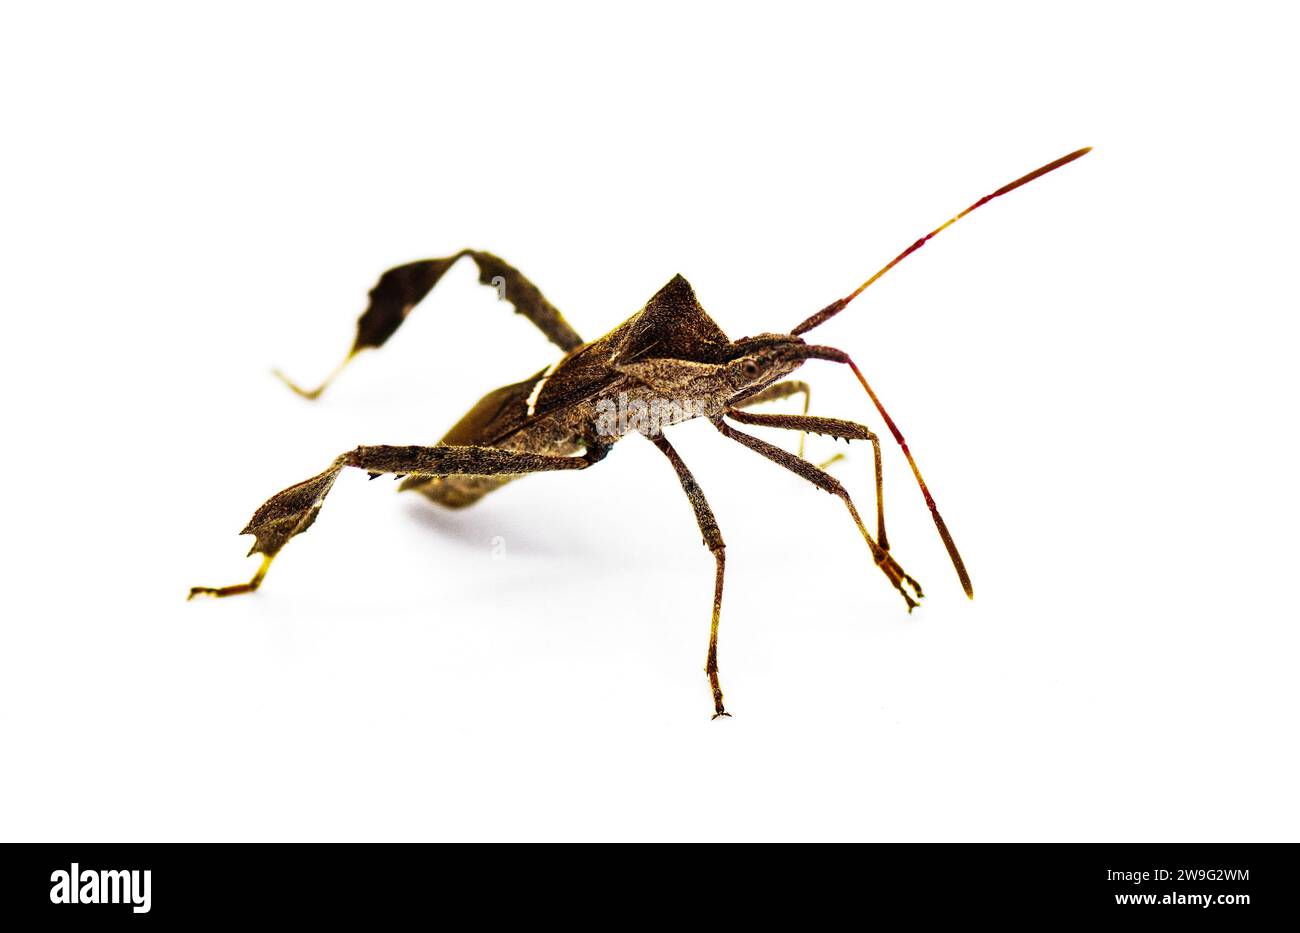 eastern leaffooted or leaf footed bug - Leptoglossus phyllopus - isolated on white background Stock Photo